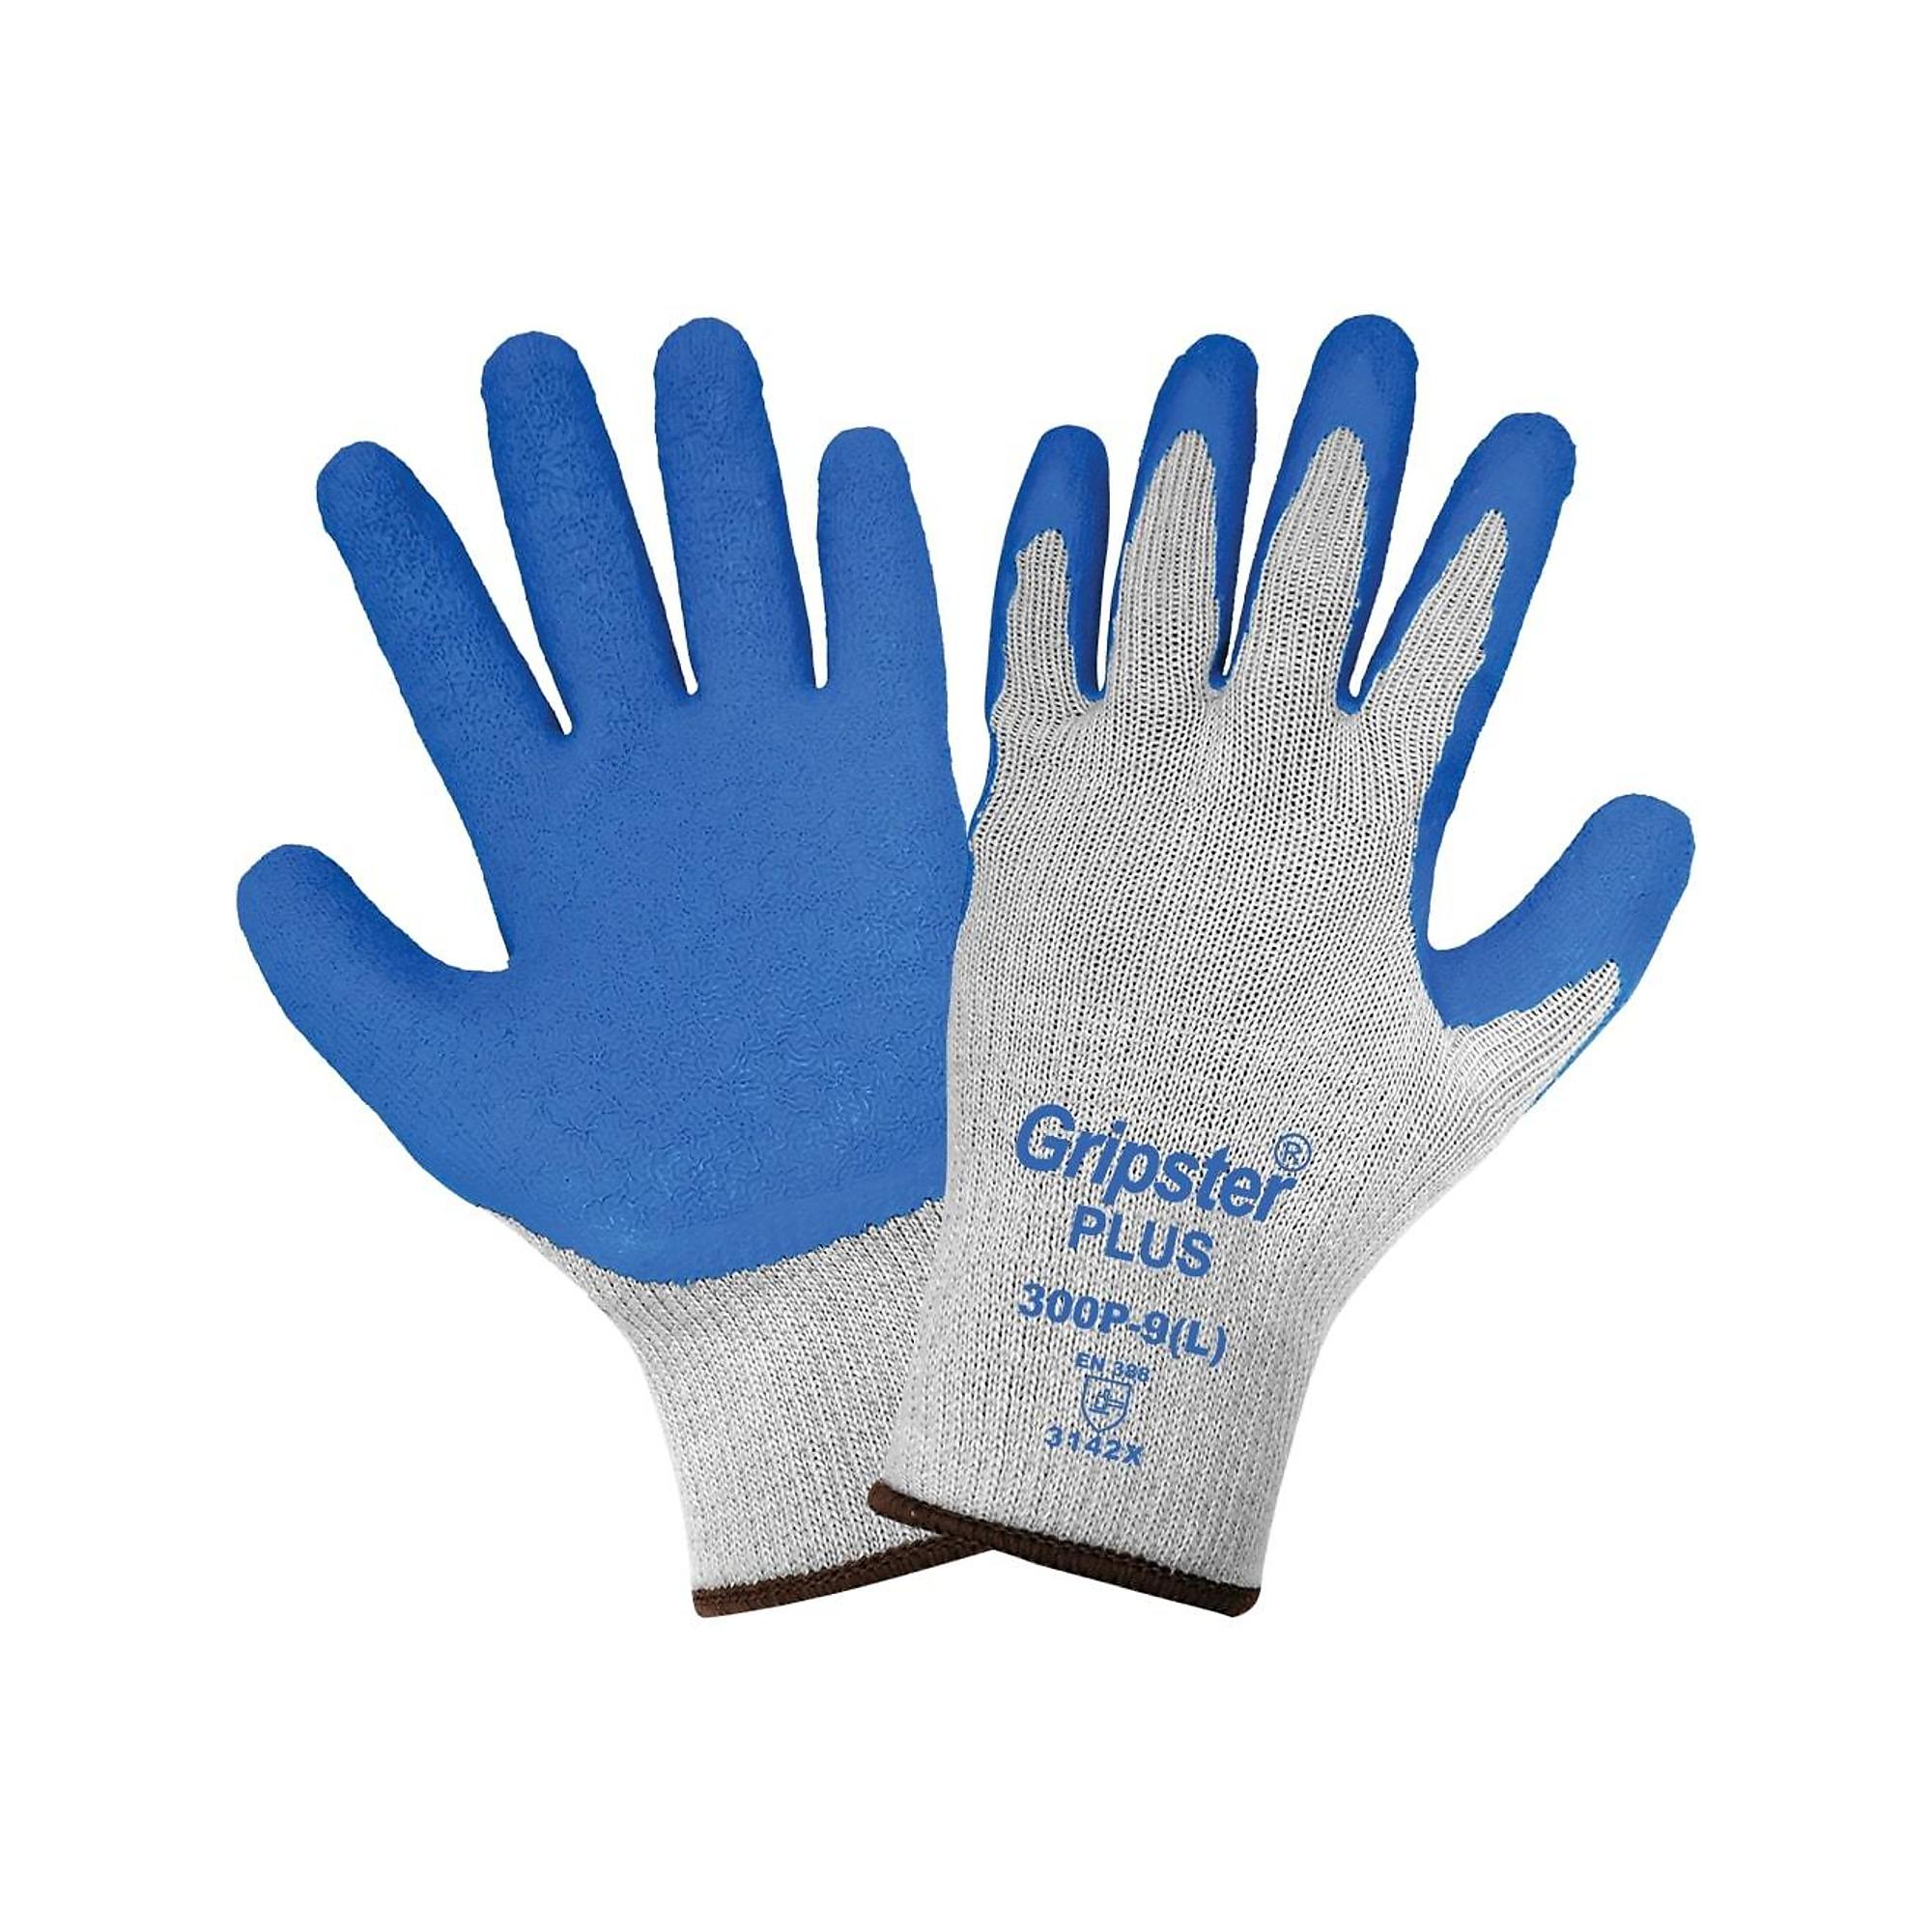 Global Glove Gripster , Gray, Blue Rubber Palm, Cut Resistant A2 Gloves - 12 Pairs, Size XL, Color Gray/Blue, Included (qty.) 12 Model 300P-10(XL)